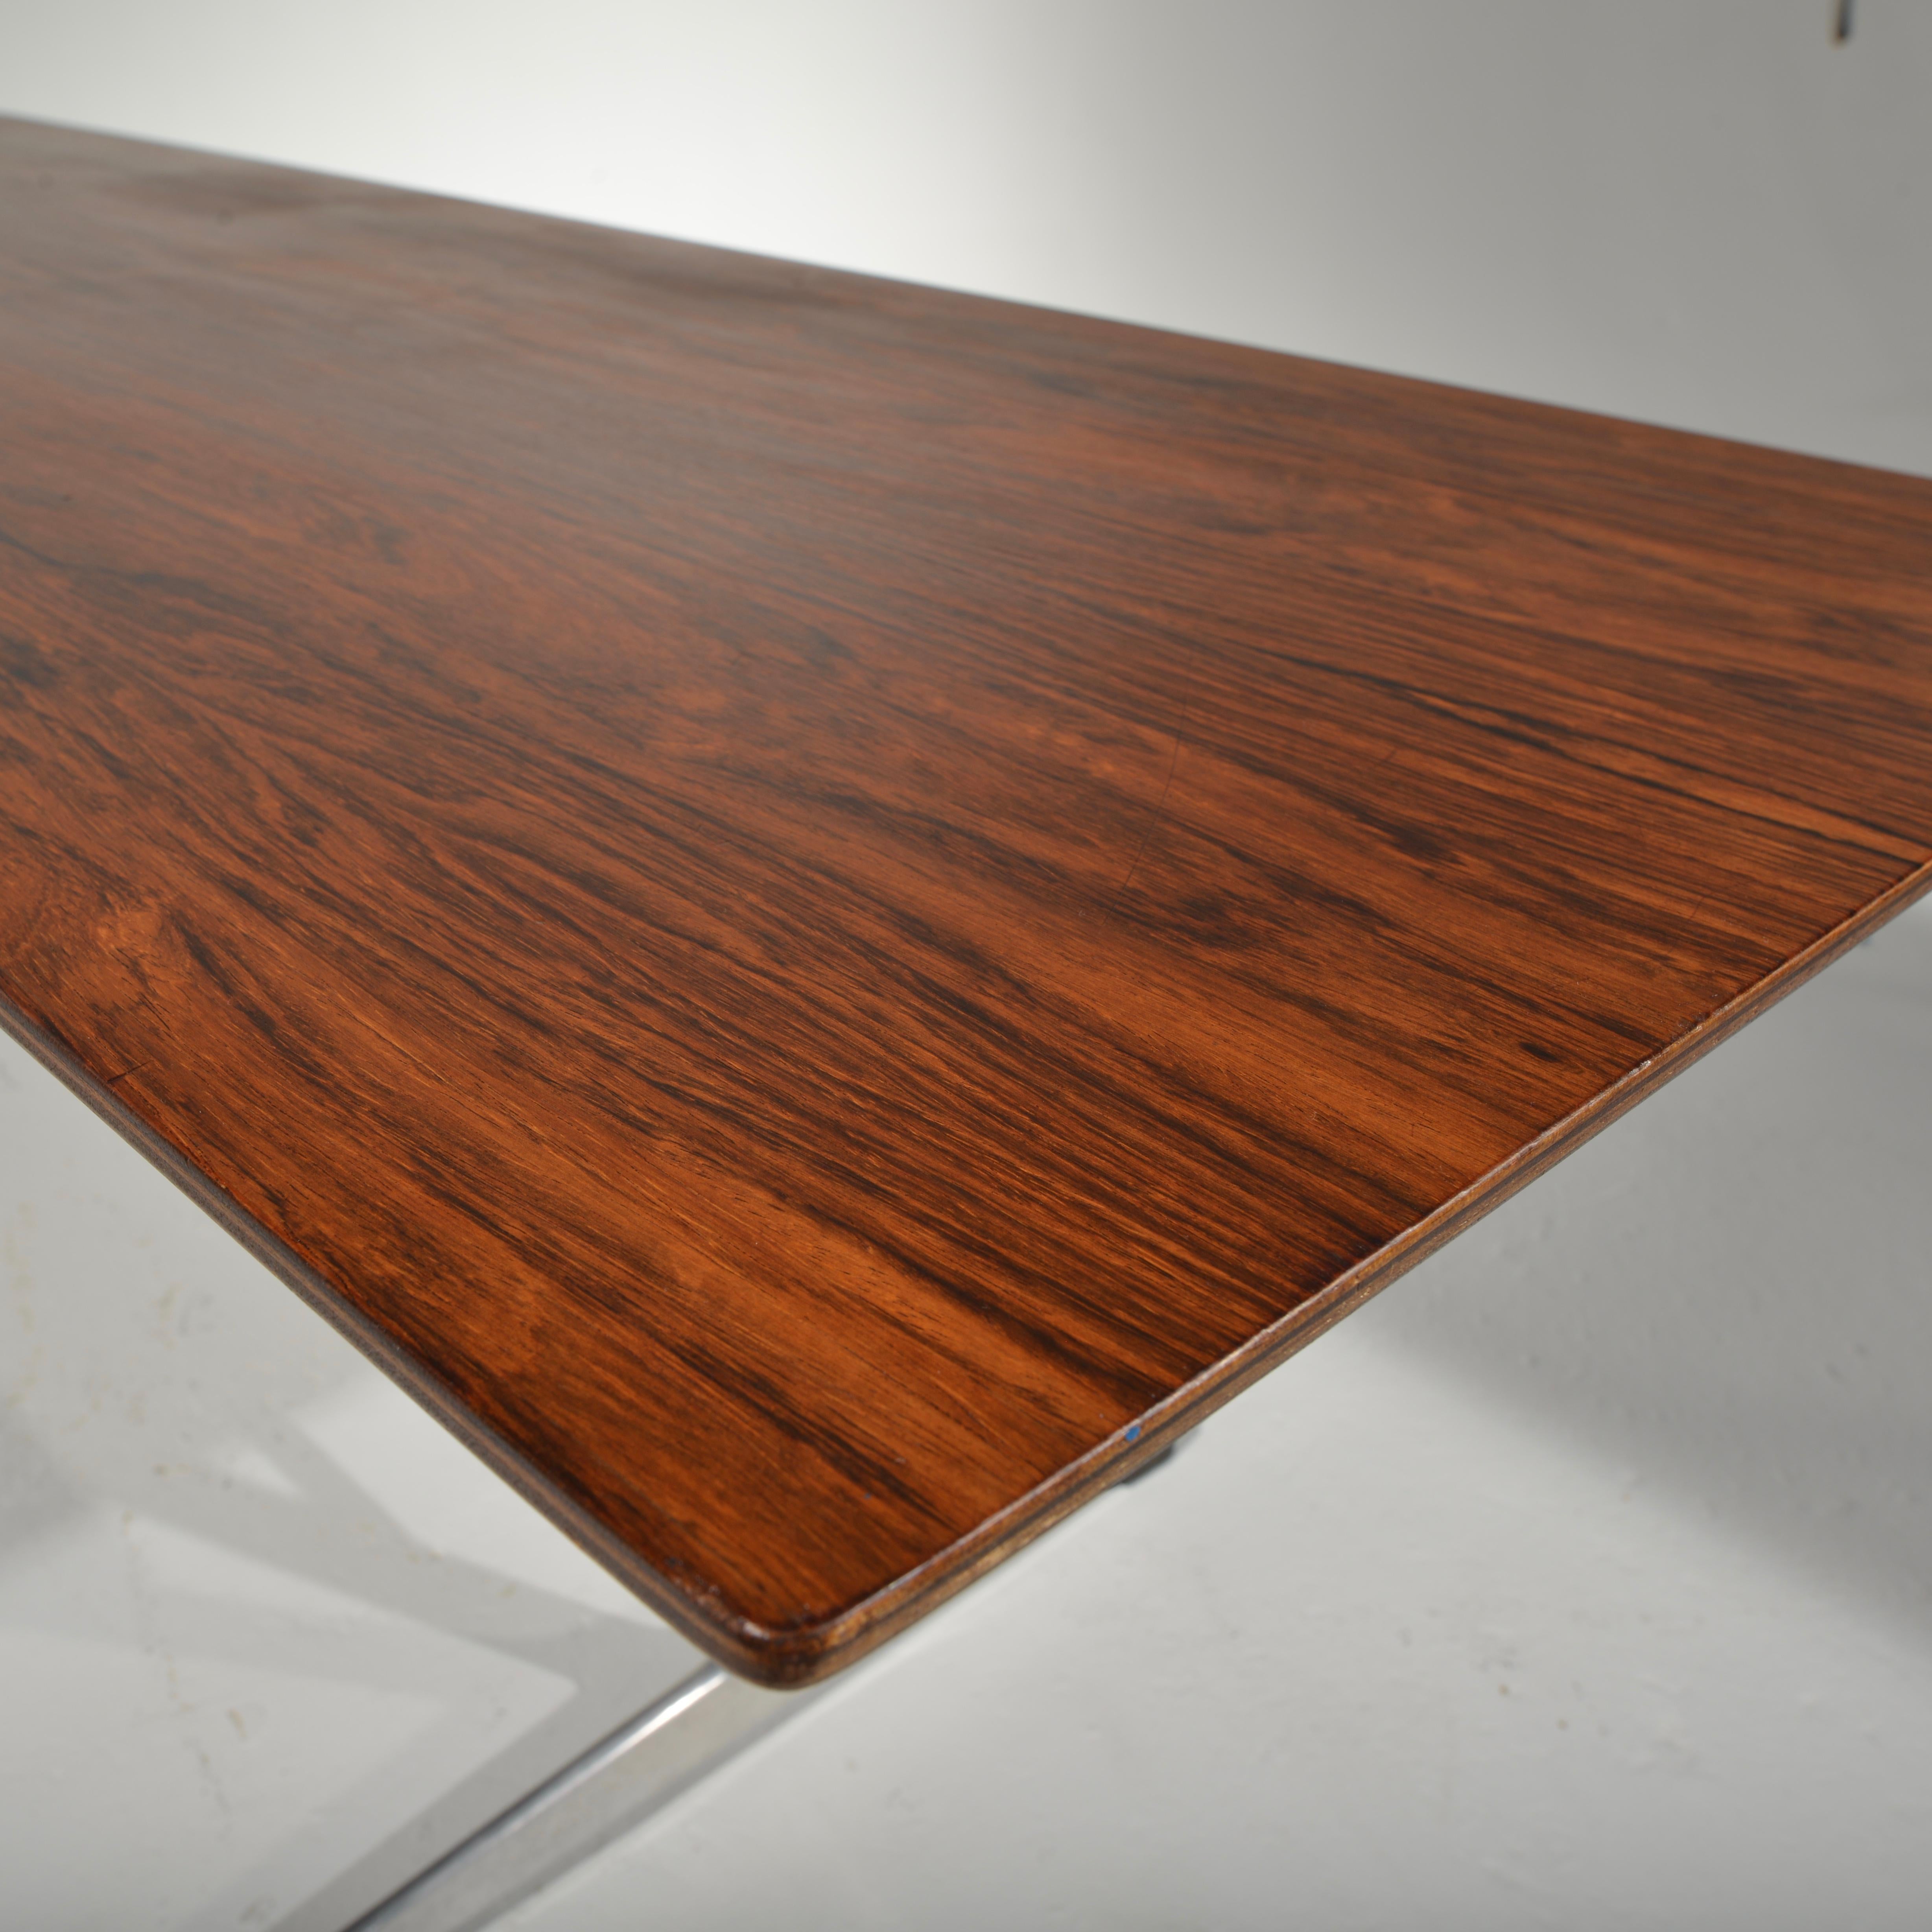 Rare Arne Jacobsen Rosewood Coffee Table For Sale 6